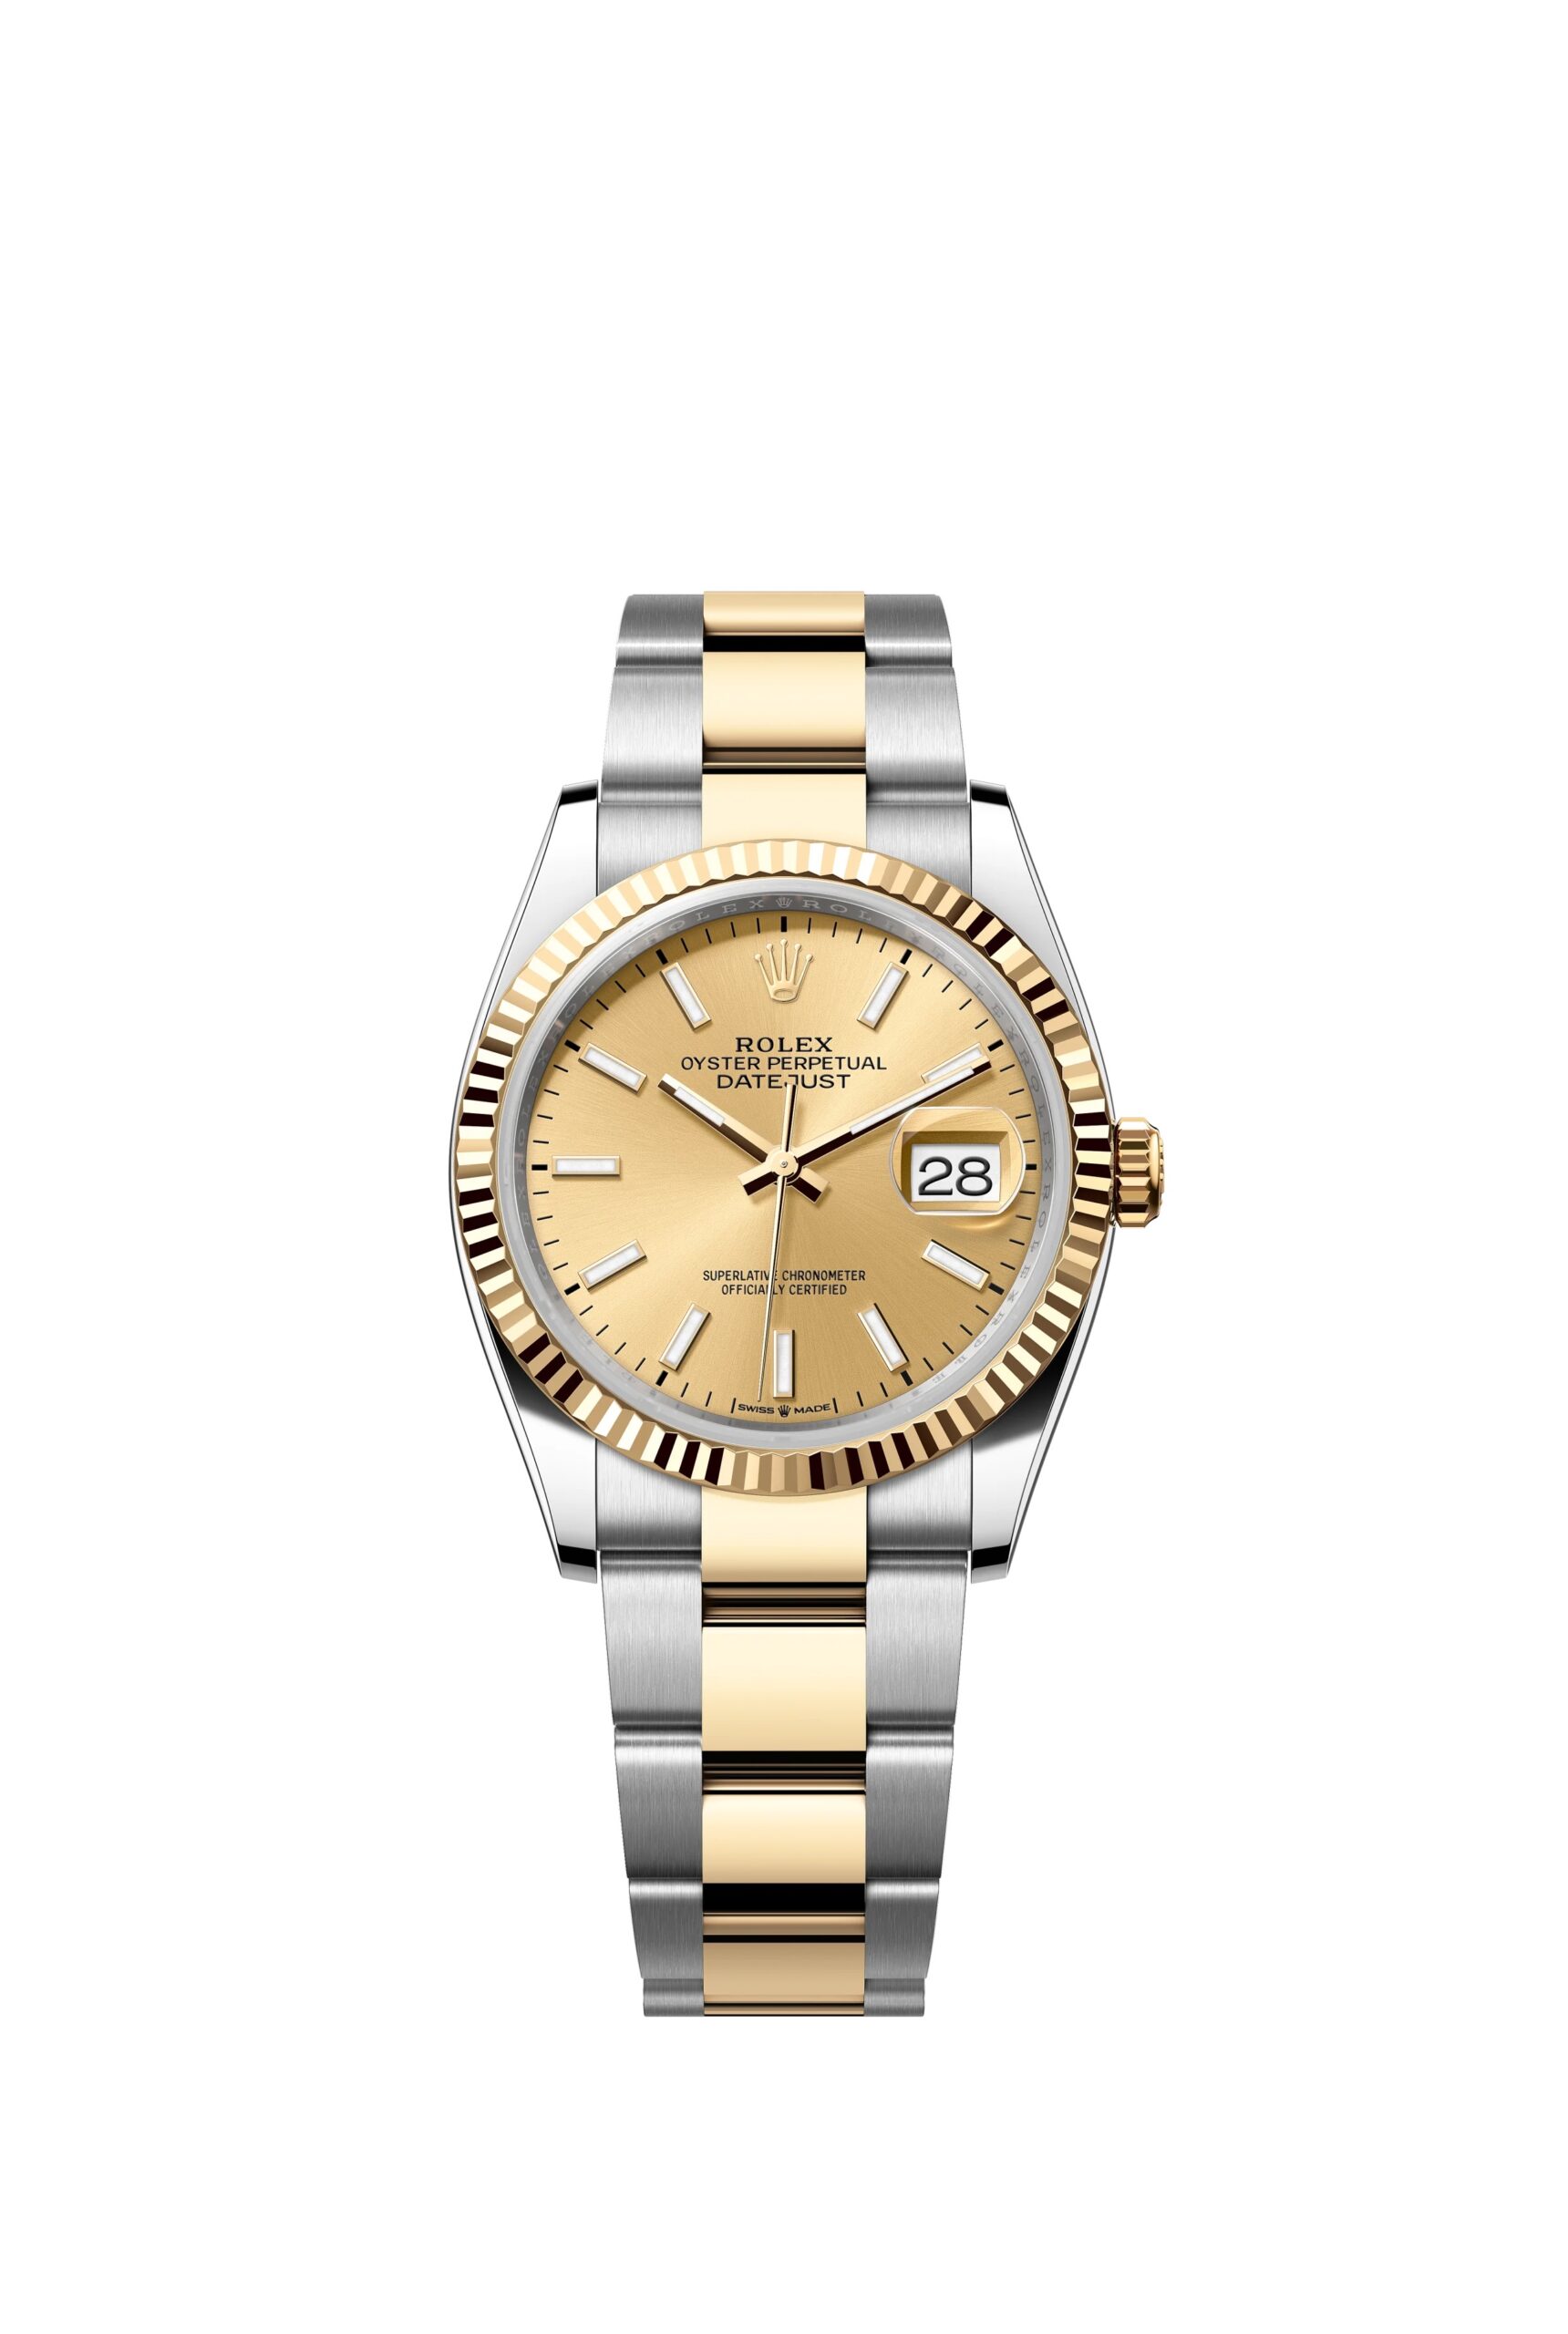 Rolex Datejust 36 Oyster, 36 mm, Oystersteel and yellow gold Reference 126233